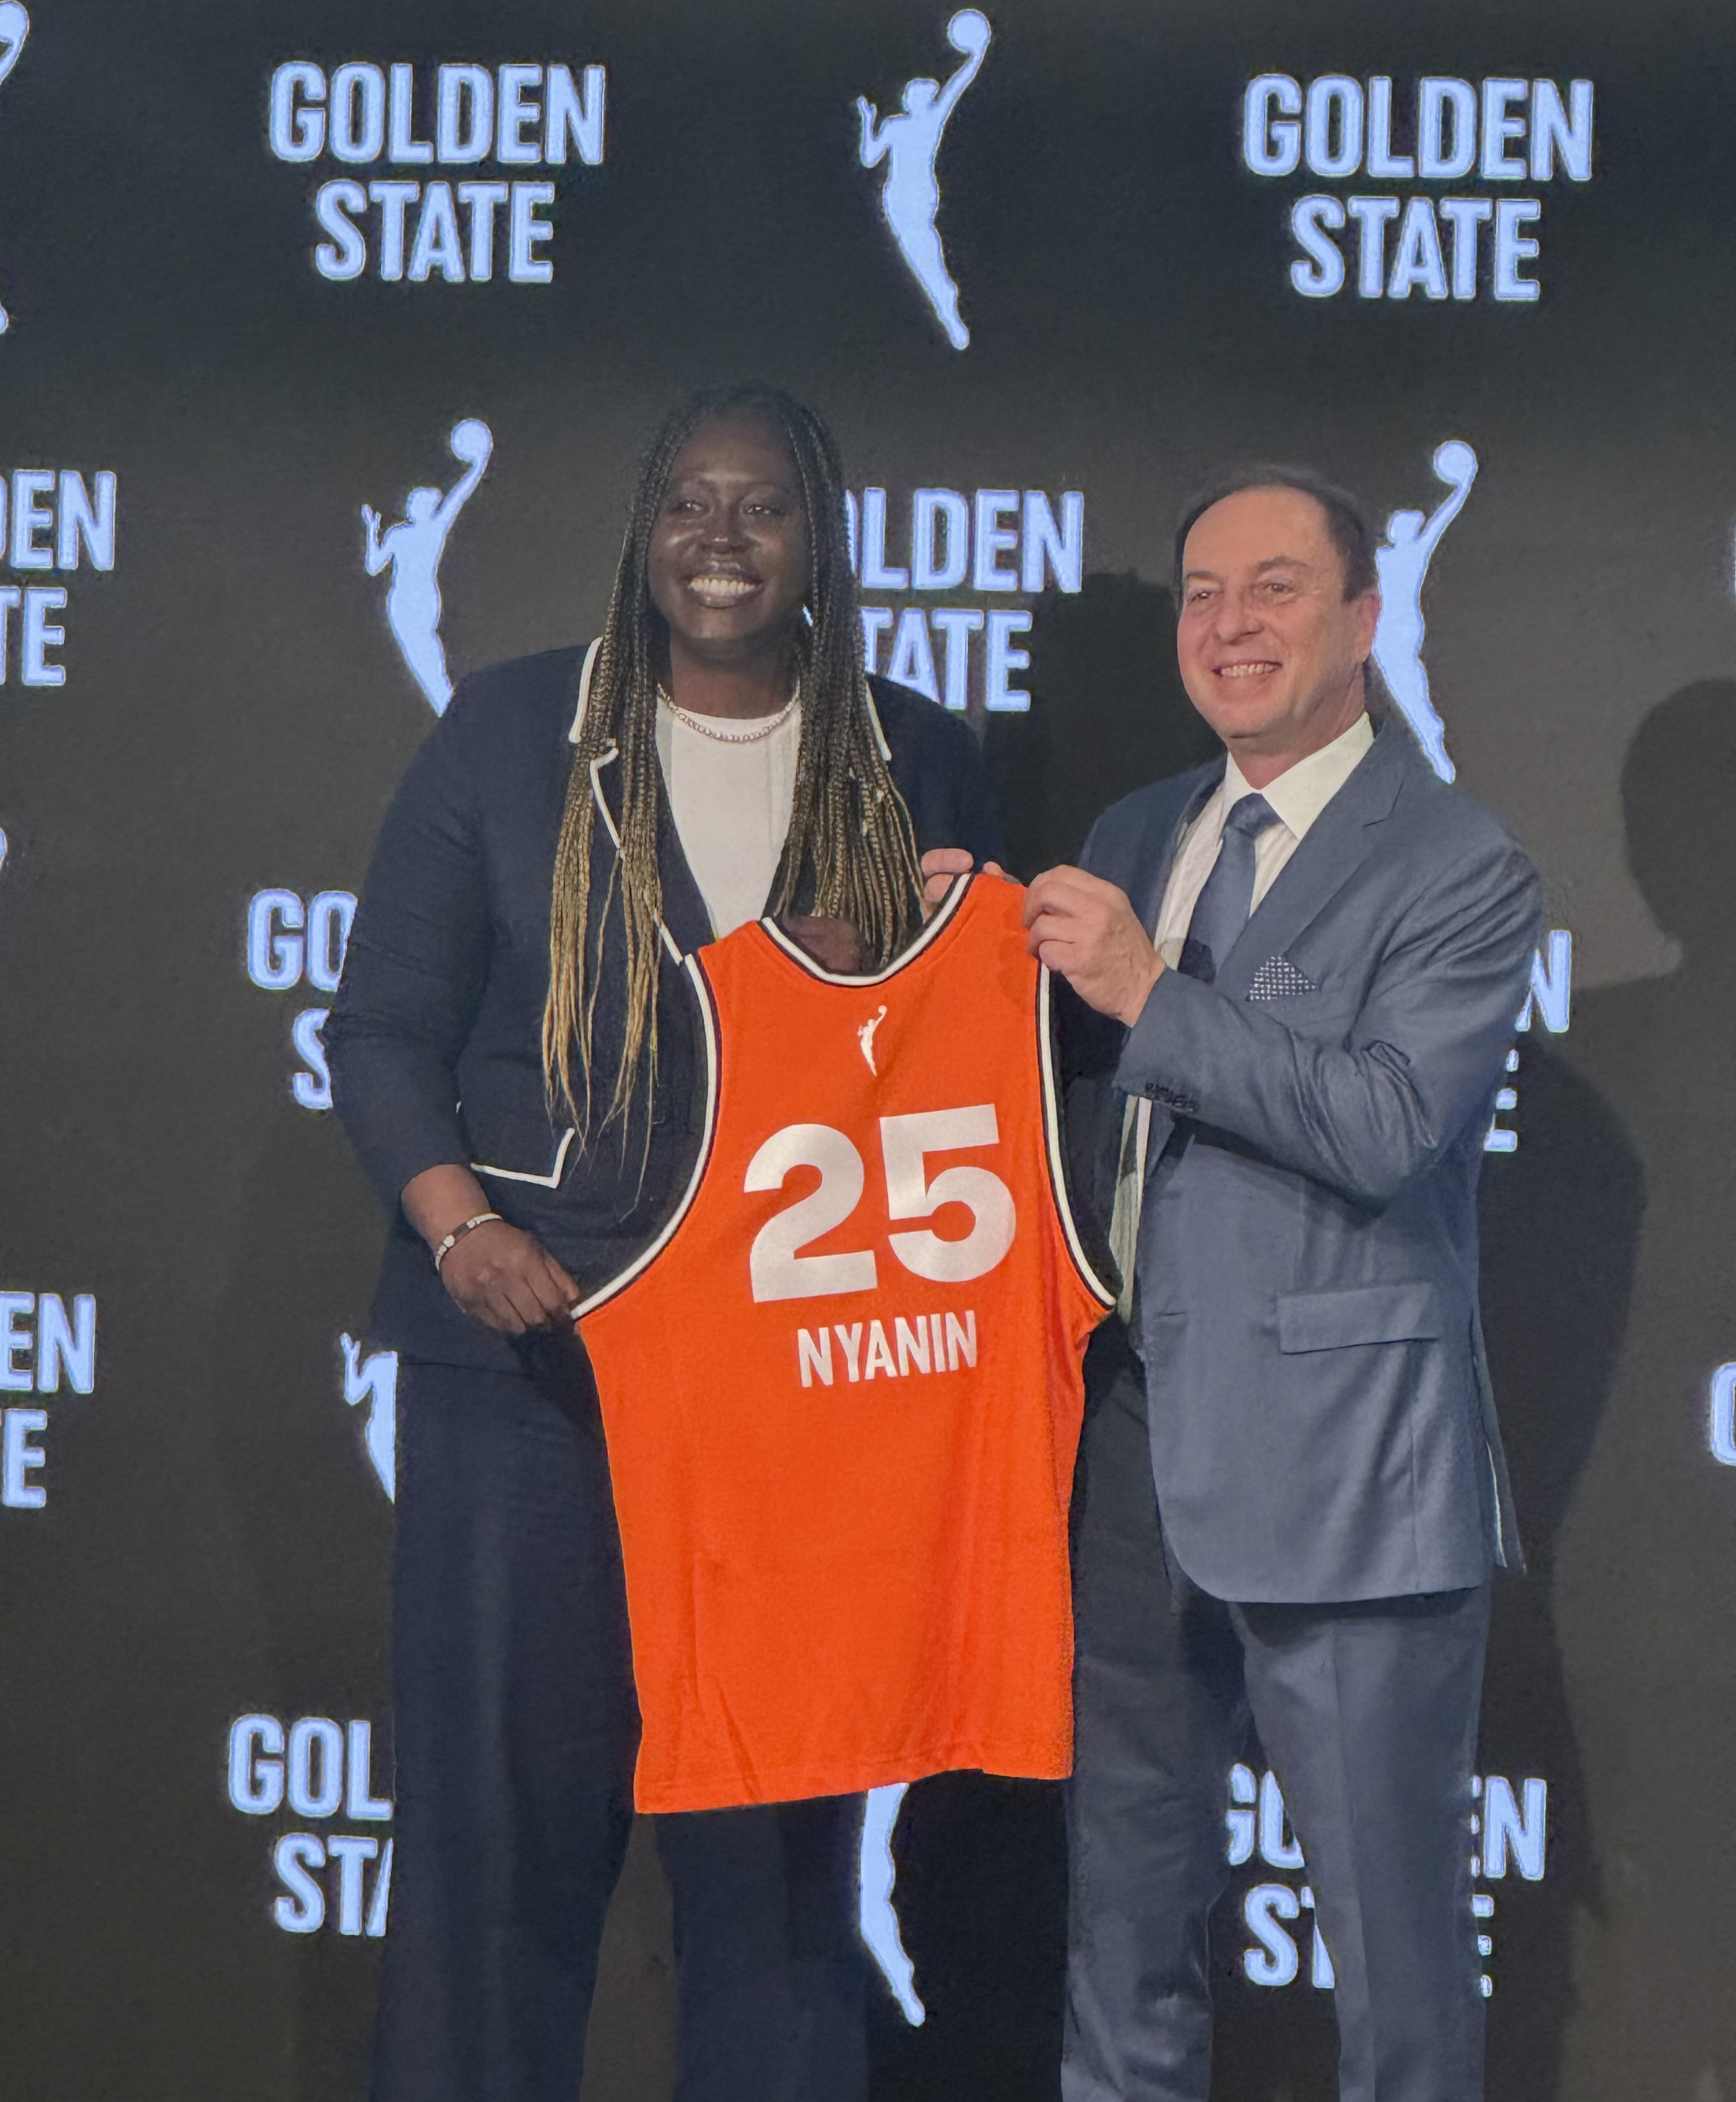 WNBA Golden State names Ohemaa Nyanin as General Manager